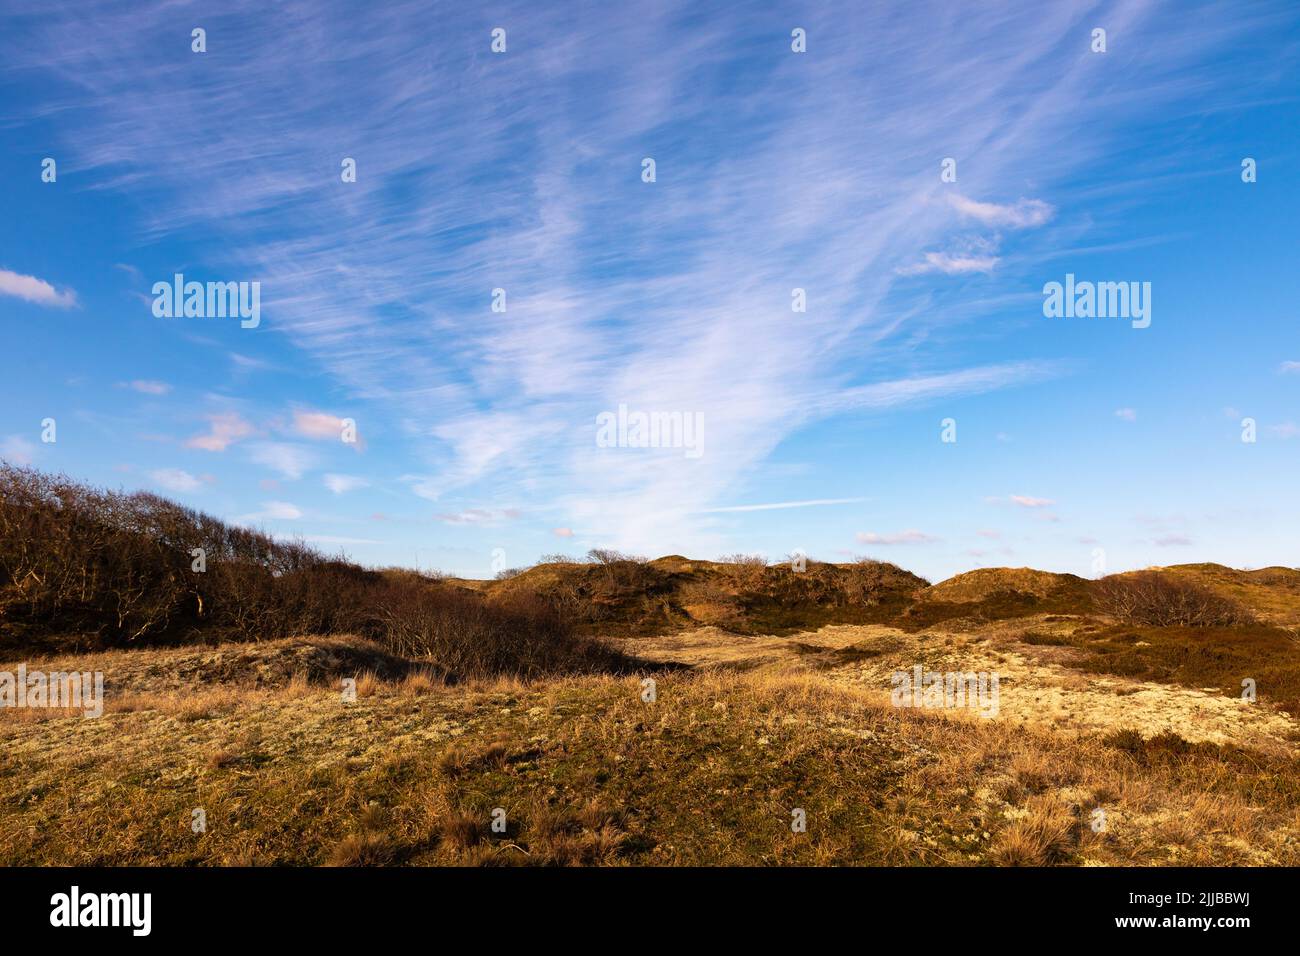 Typical landscape on the East Frisian Island of Spiekeroog, Germany Stock Photo